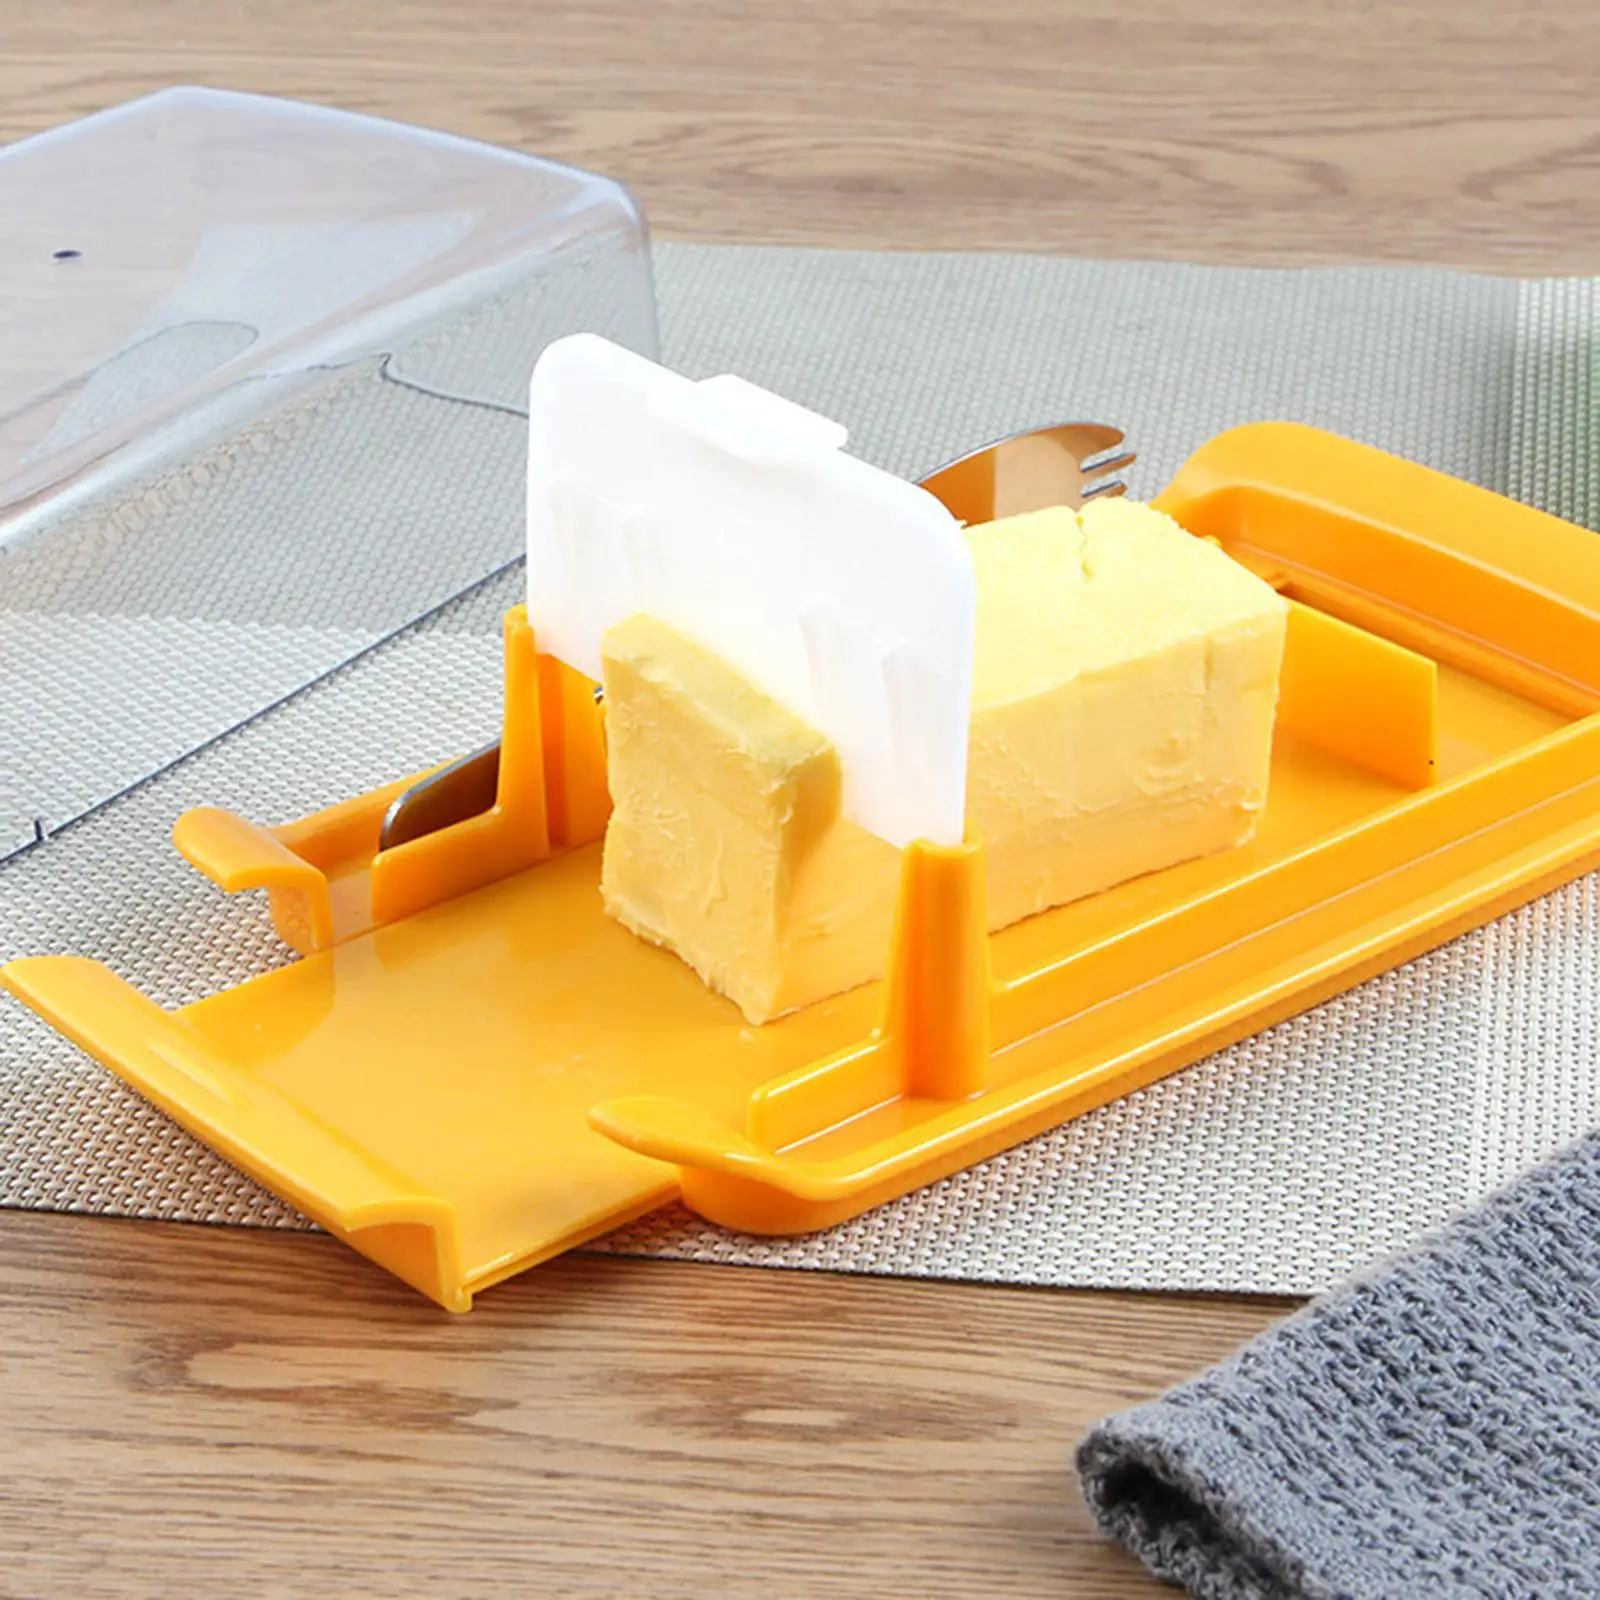 Sealing Storage Keeper Tray with Lid Stainless Steel Tangent Fresh Keeping Storage Butter Dish with Lid for Cheese